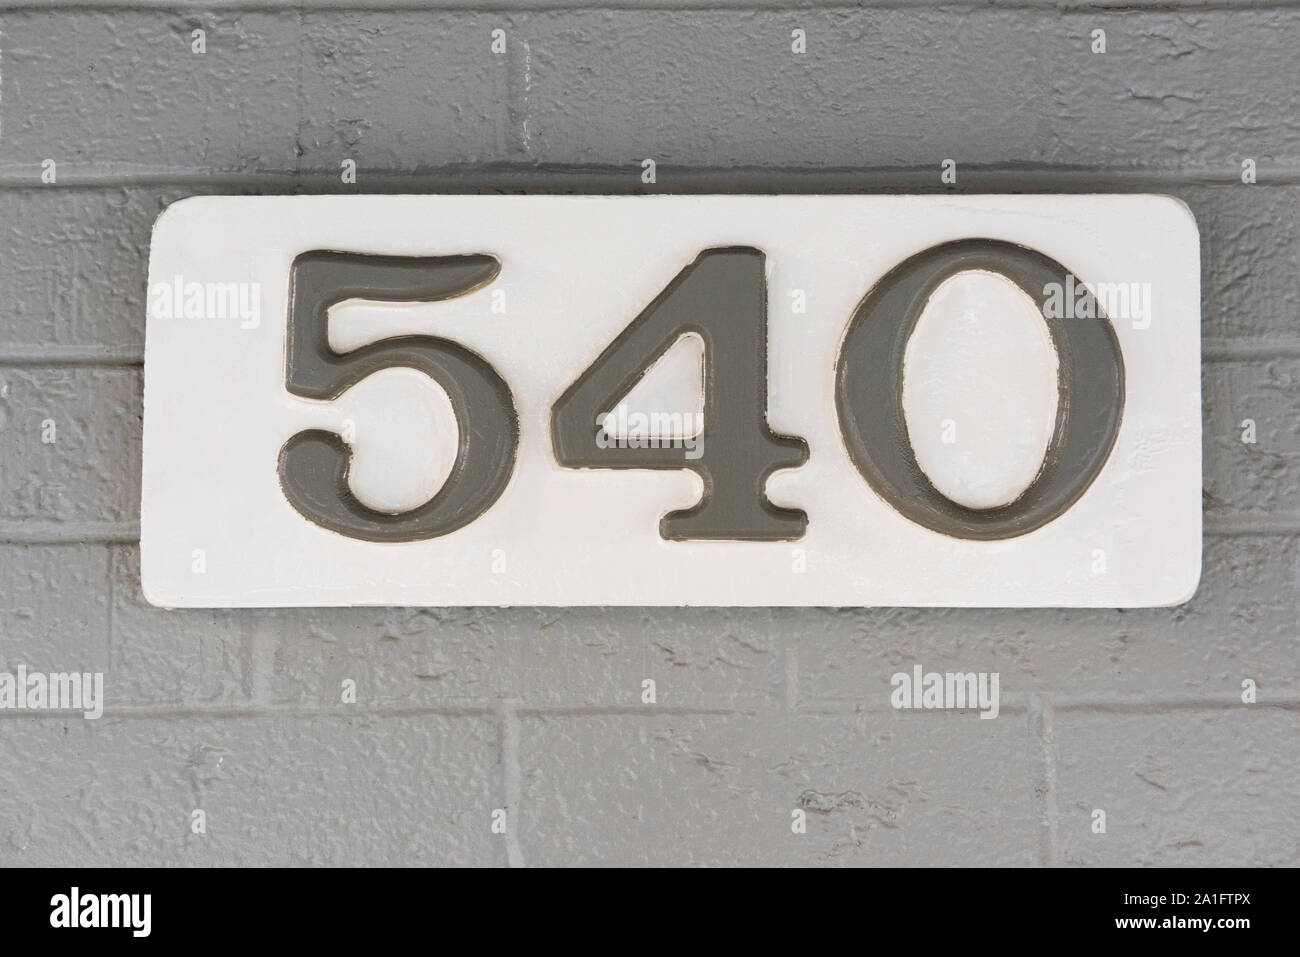 Building number five hundred and forty (540) on a white plaque against a grey brick wall Stock Photo